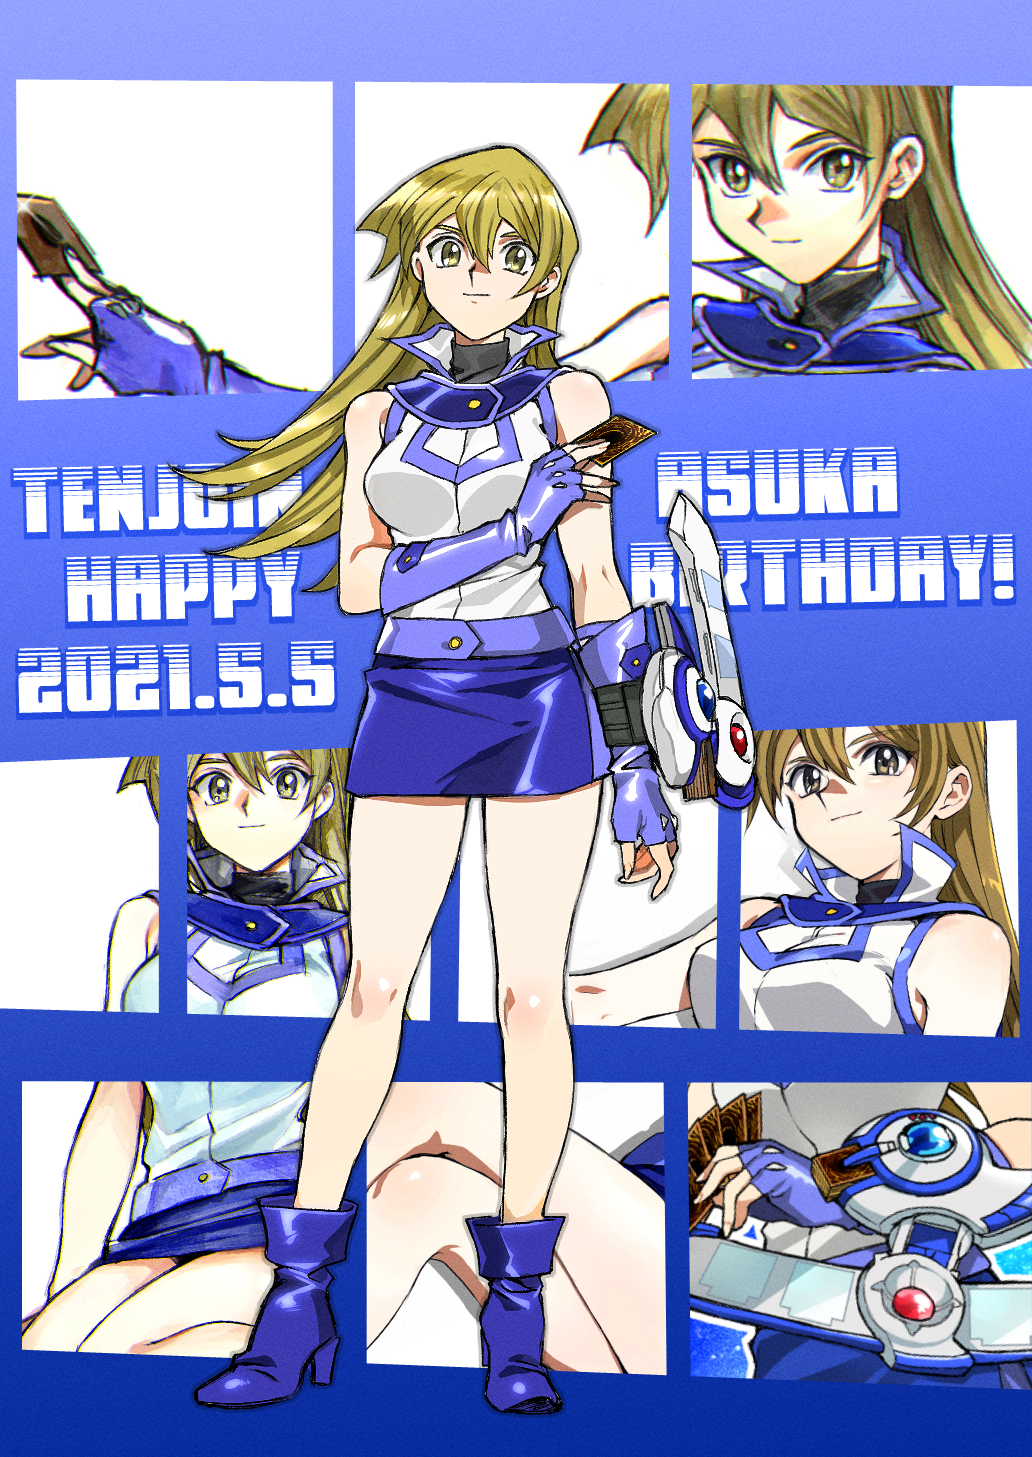 1girl 203wolves ankle_boots bangs bare_shoulders belt beltskirt blonde_hair blue_footwear blue_skirt boots breasts card character_name commentary_request duel_academy_uniform_(yu-gi-oh!_gx) duel_disk elbow_gloves eyebrows_visible_through_hair fingerless_gloves full_body gloves highres holding long_hair looking_at_viewer medium_breasts miniskirt multiple_views shiny shiny_clothes shiny_hair simple_background skirt sleeveless smile standing tenjouin_asuka thighs uniform yellow_eyes yu-gi-oh! yu-gi-oh!_gx